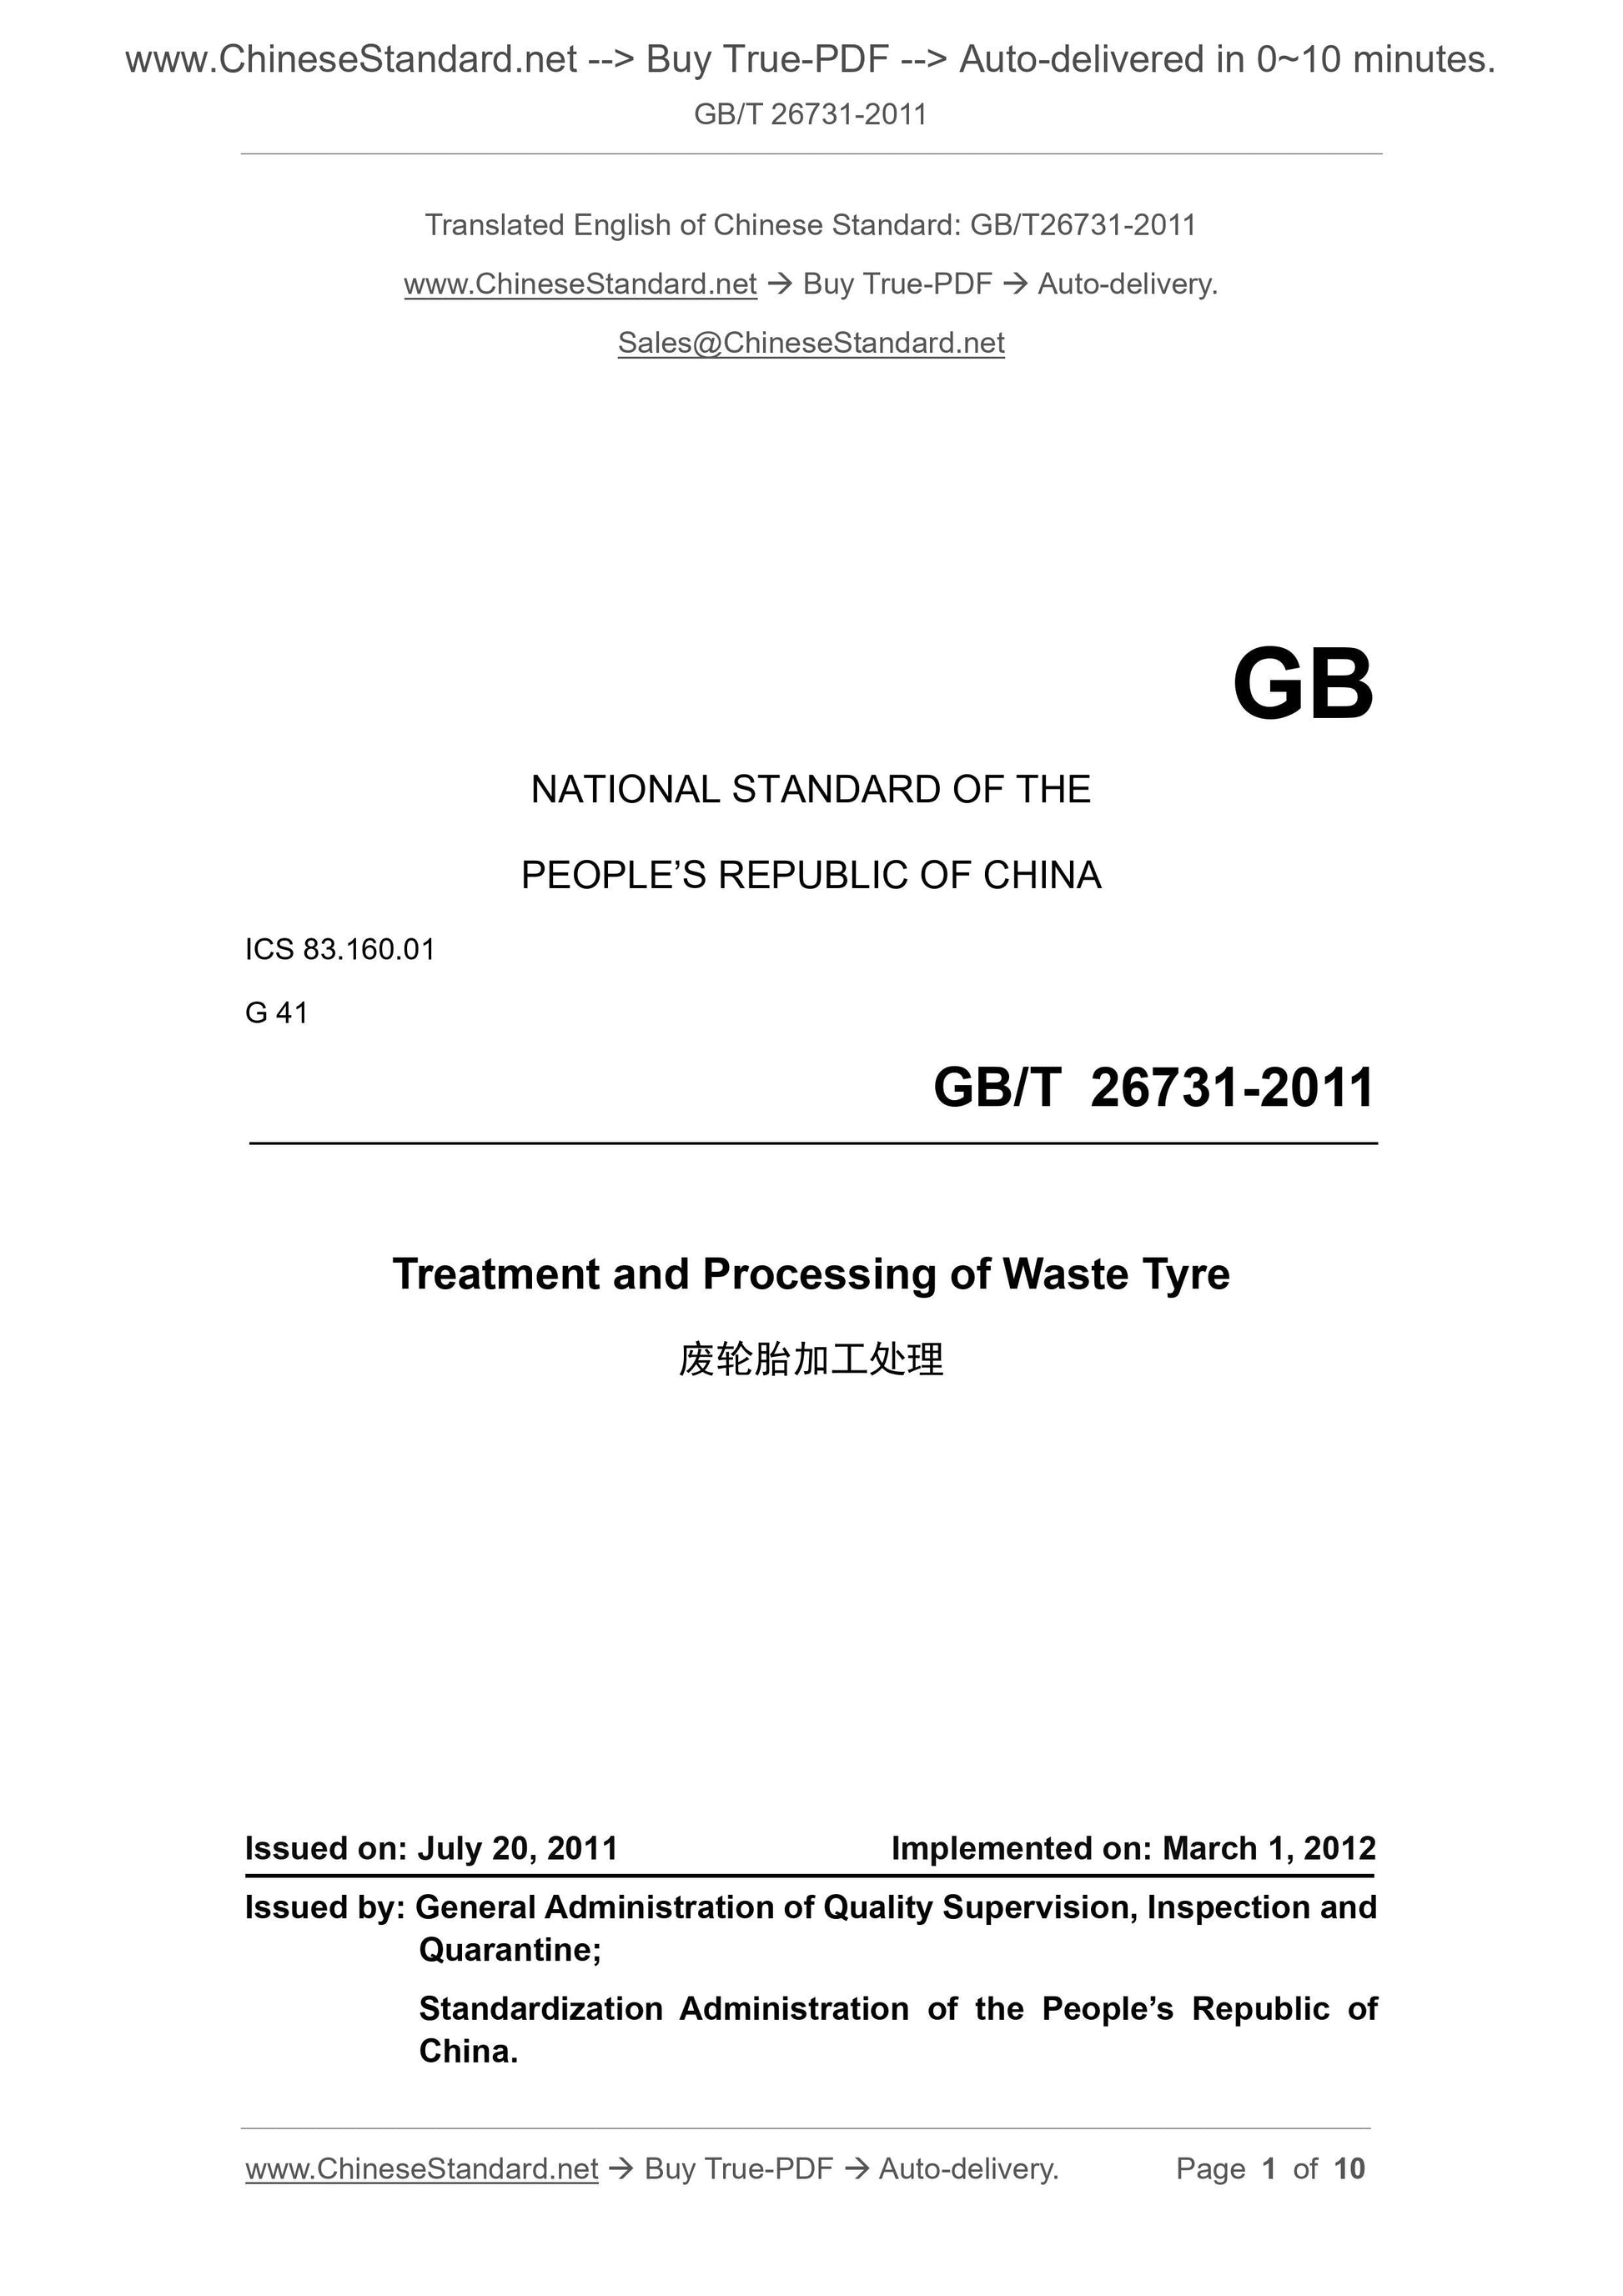 GB/T 26731-2011 Page 1